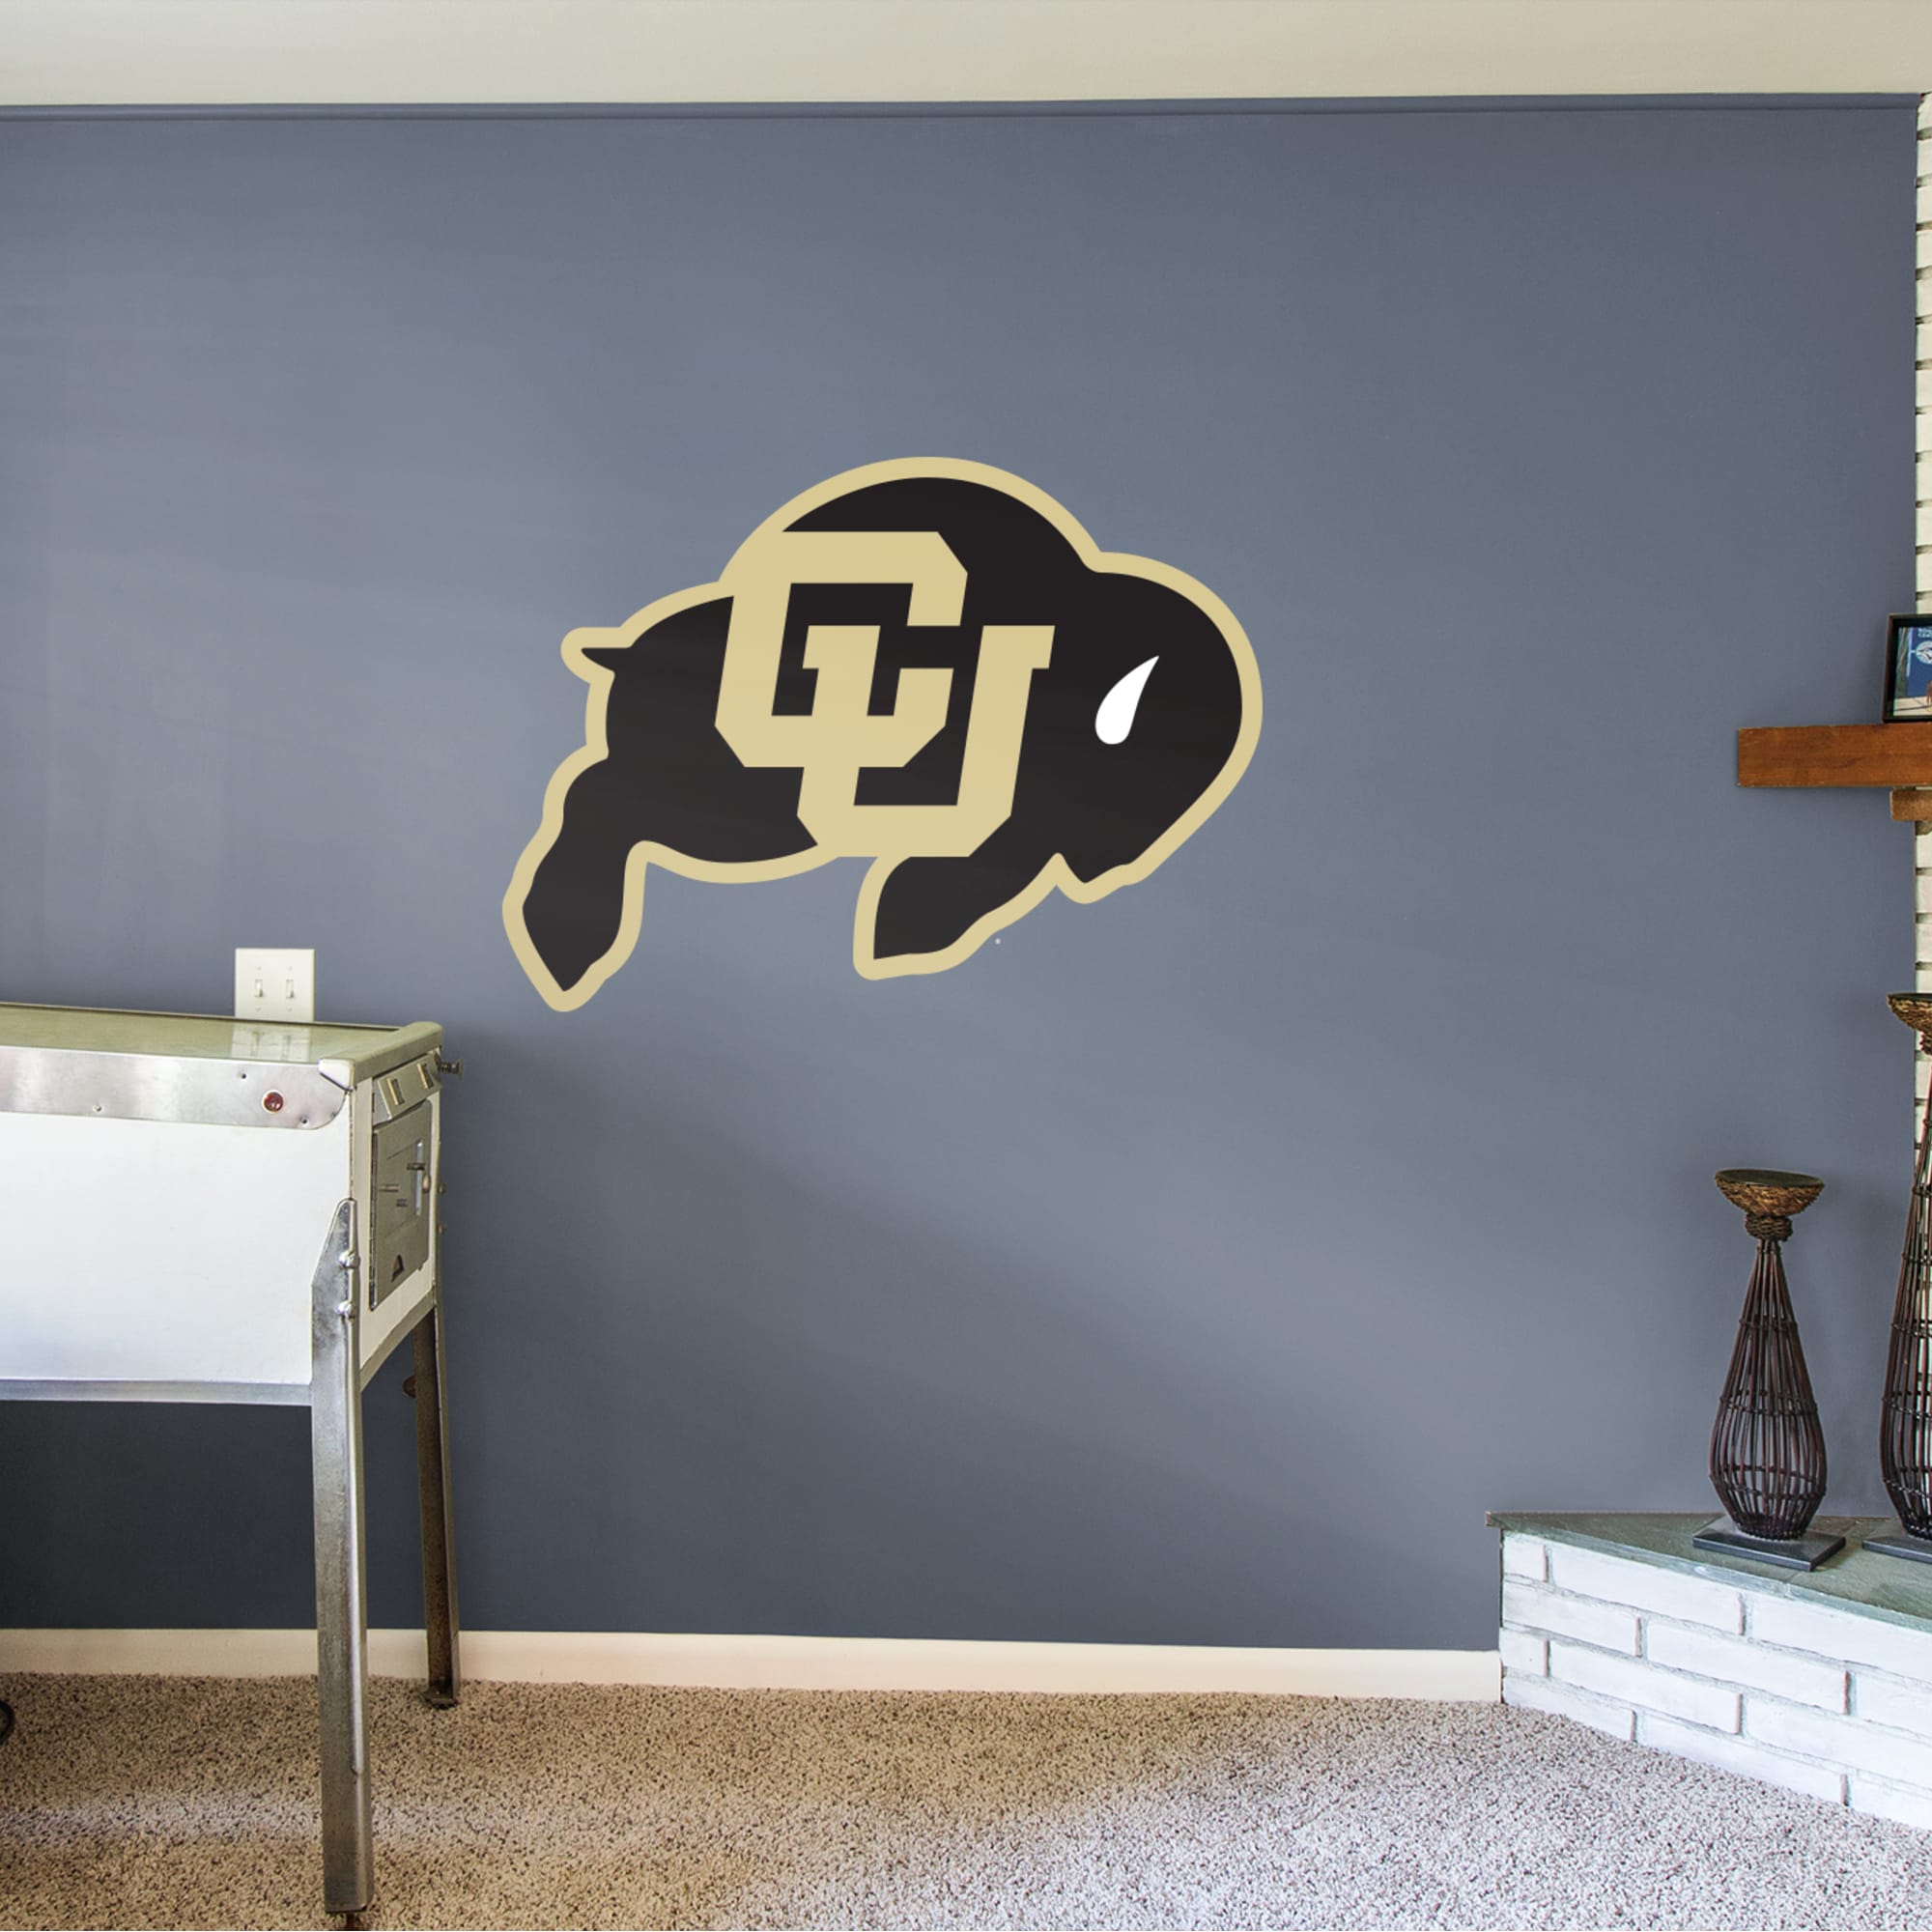 Colorado Buffaloes: Logo - Officially Licensed Removable Wall Decal 50"W x 37"H by Fathead | Vinyl